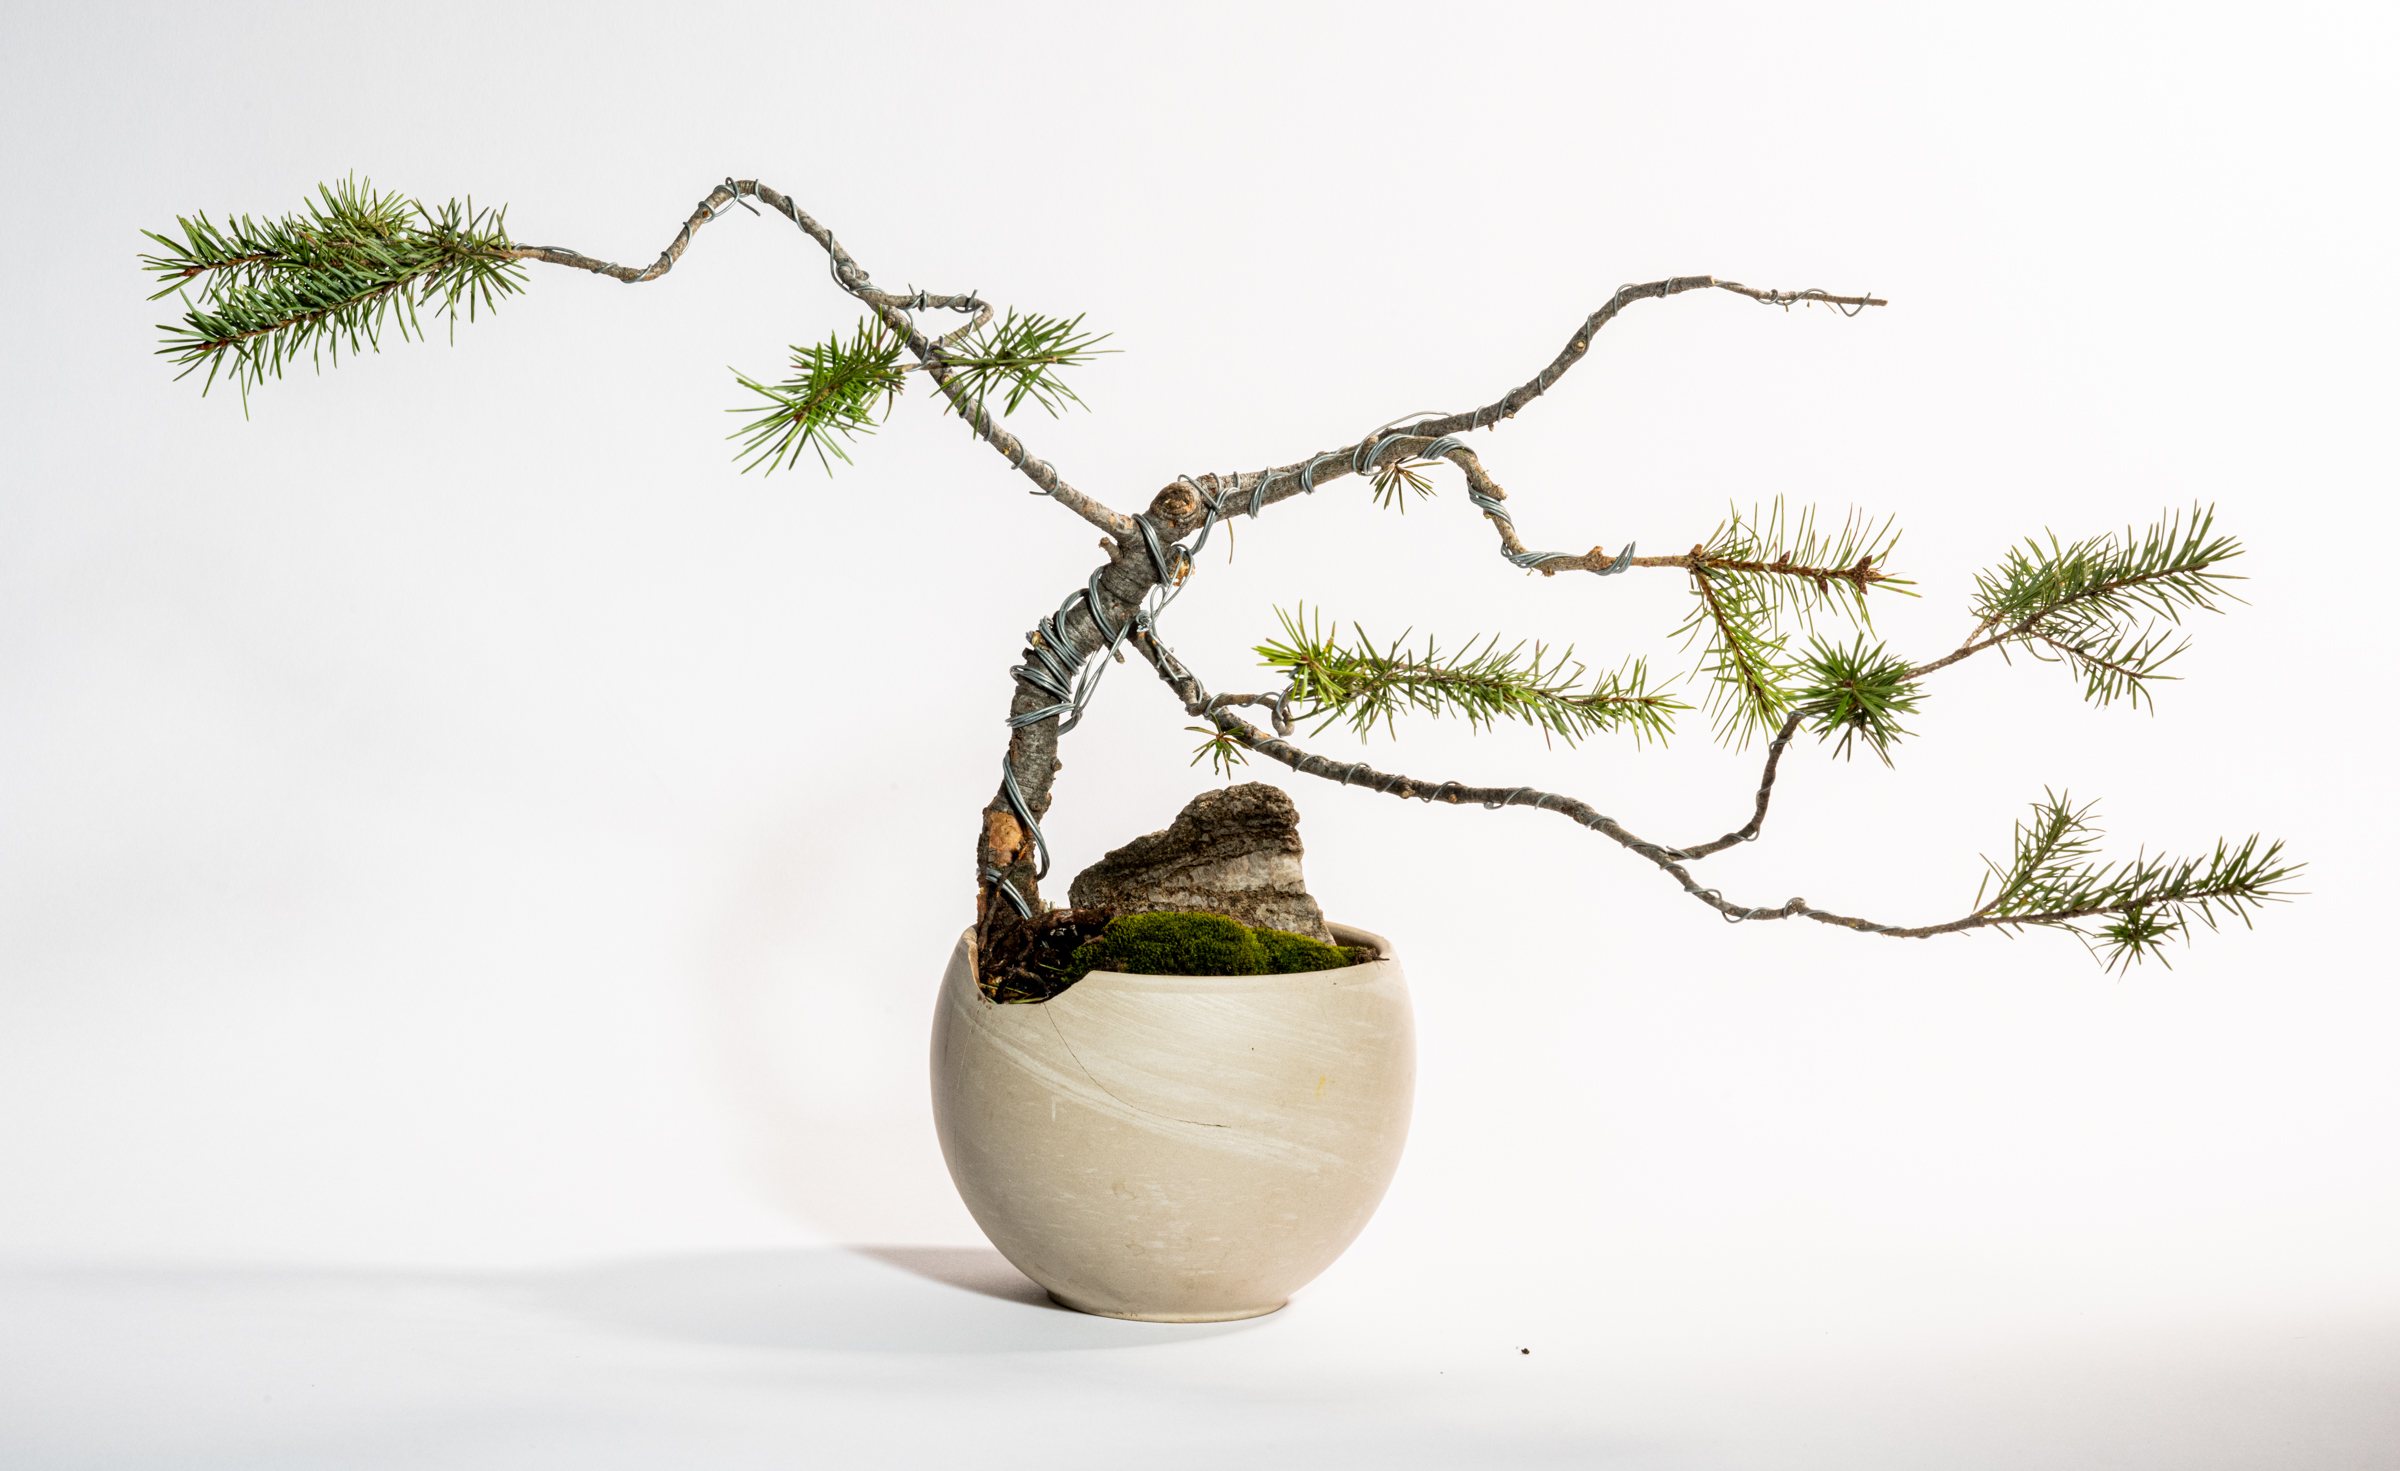 Exploring the Art of Bonsai: A Lodgepole Pine In The Books